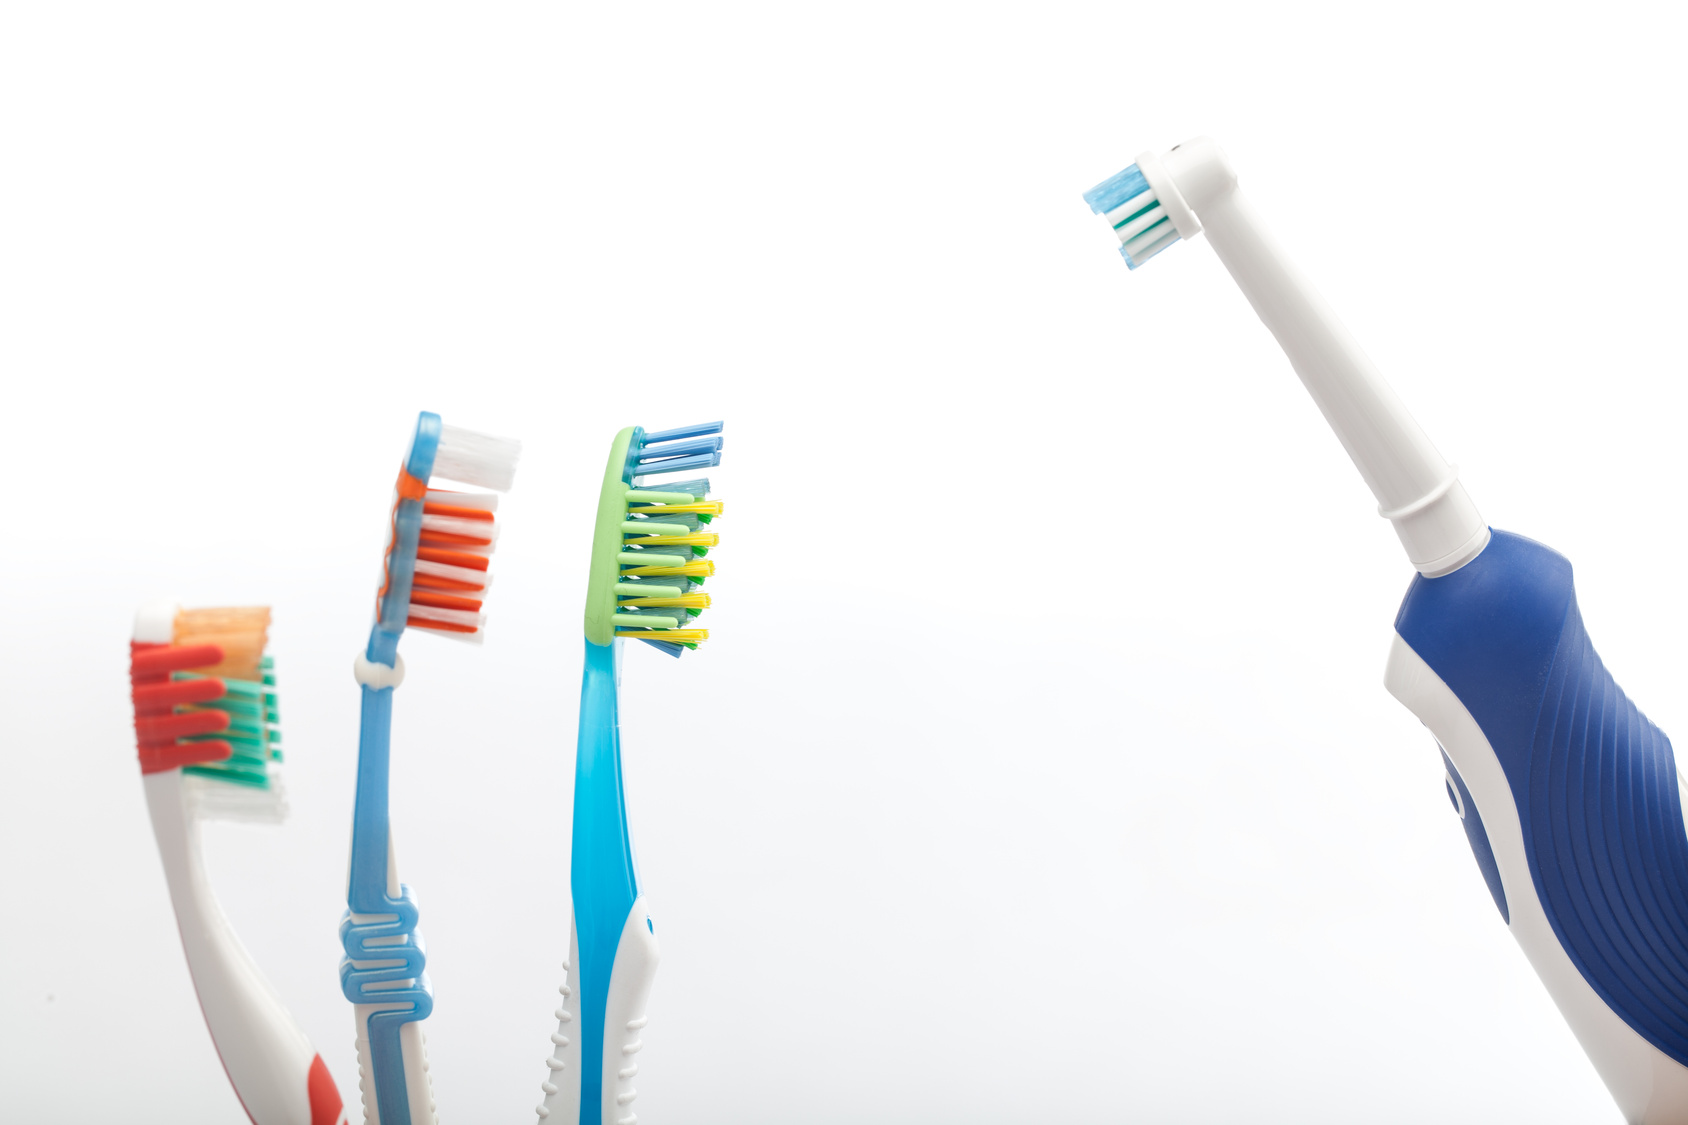 Should you use a manual or an electric toothbrush?